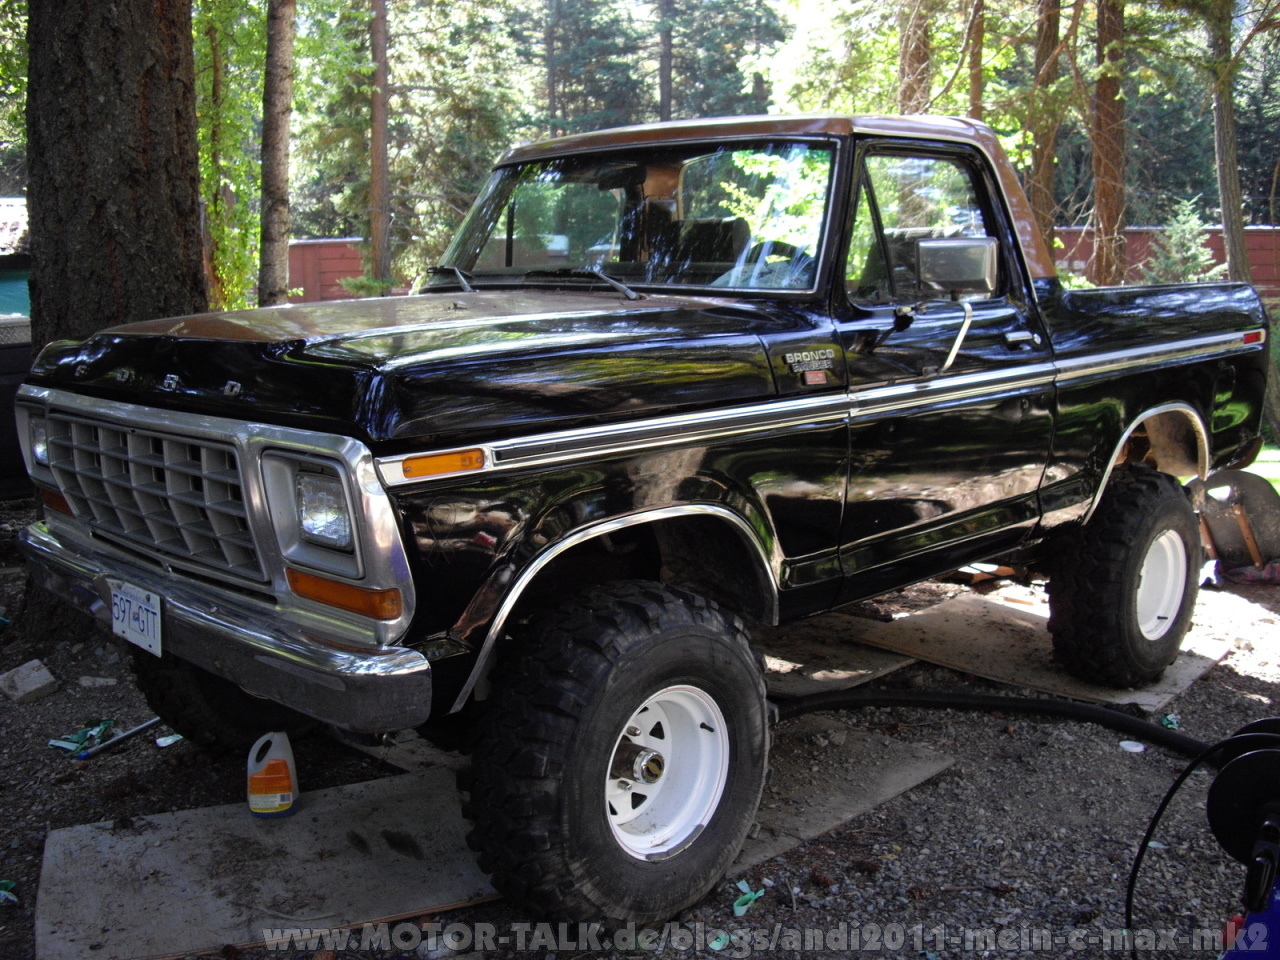 Value of 1978 ford broncos #2